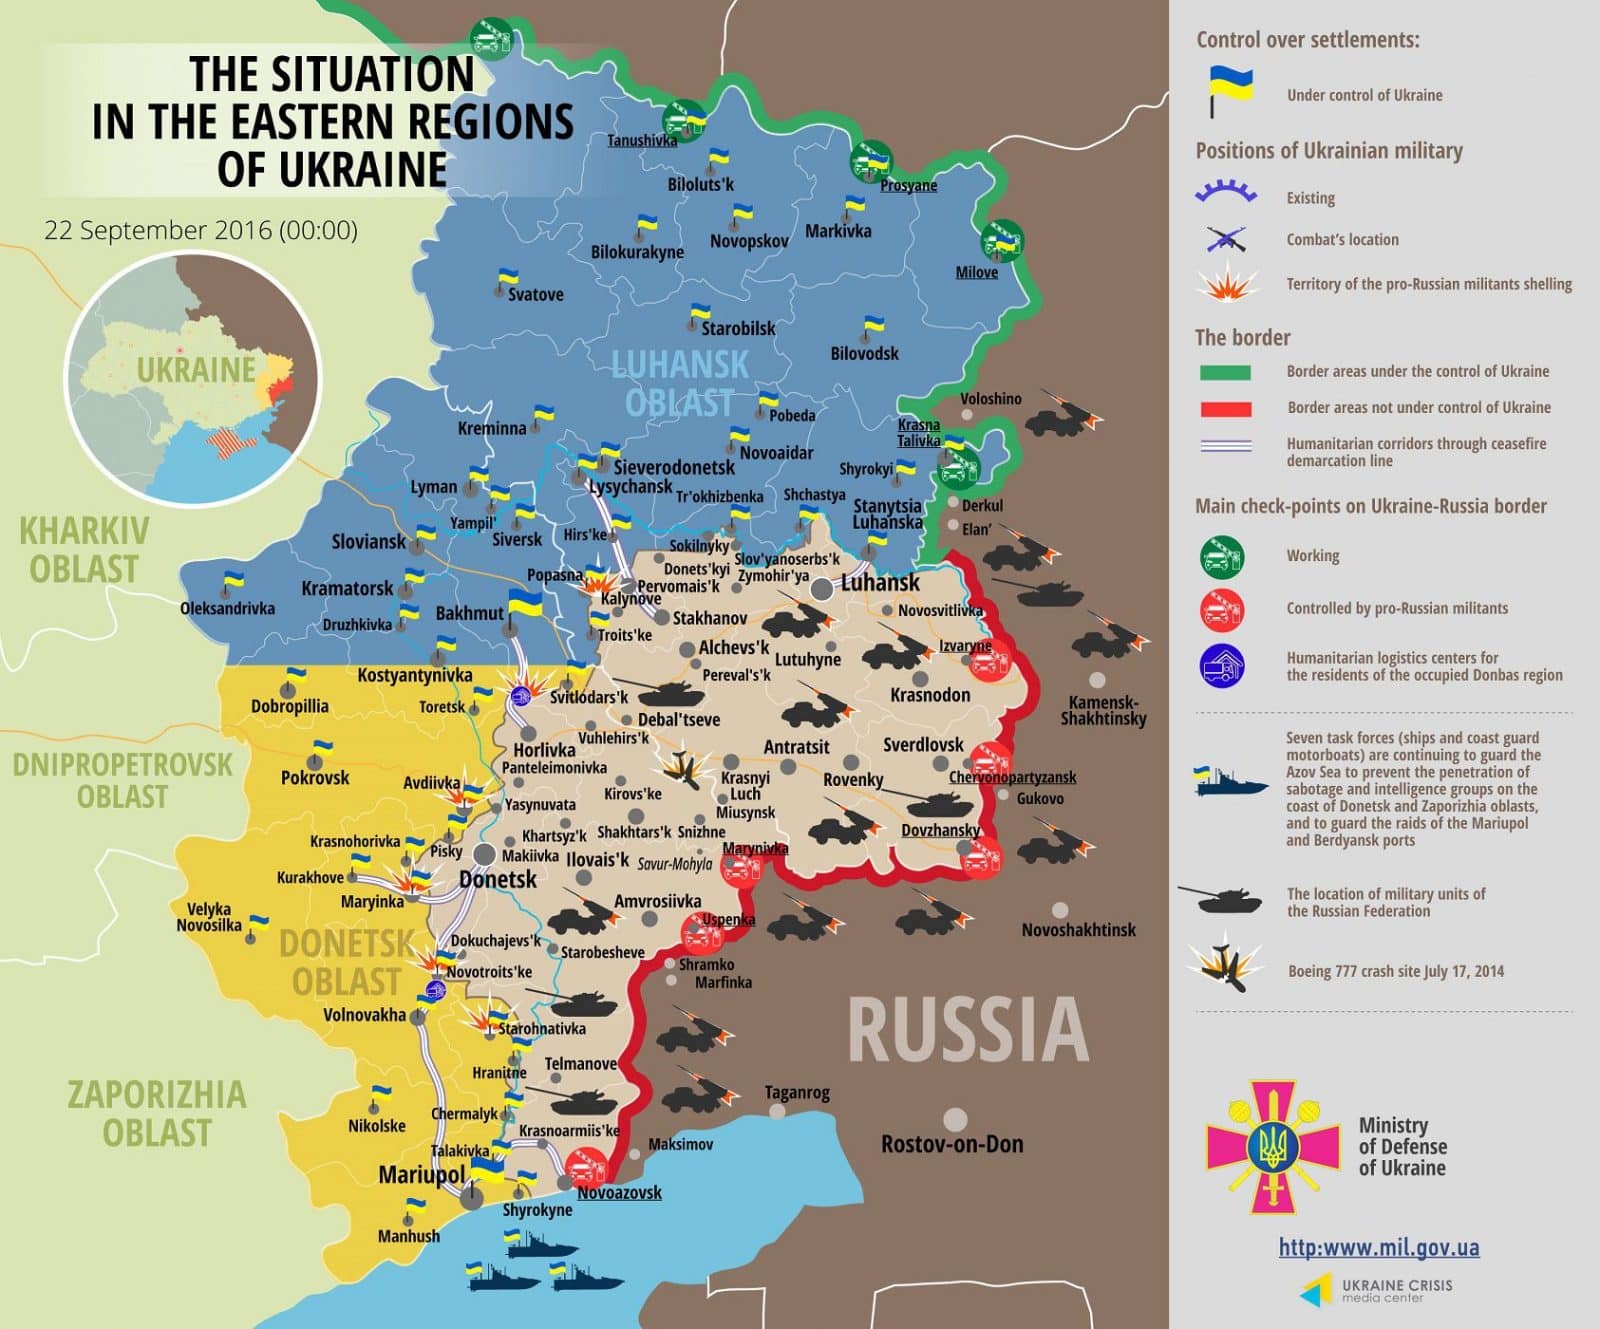 ”Ceasefire” in Donbas: 14 attacks on Ukrainian troops in past day